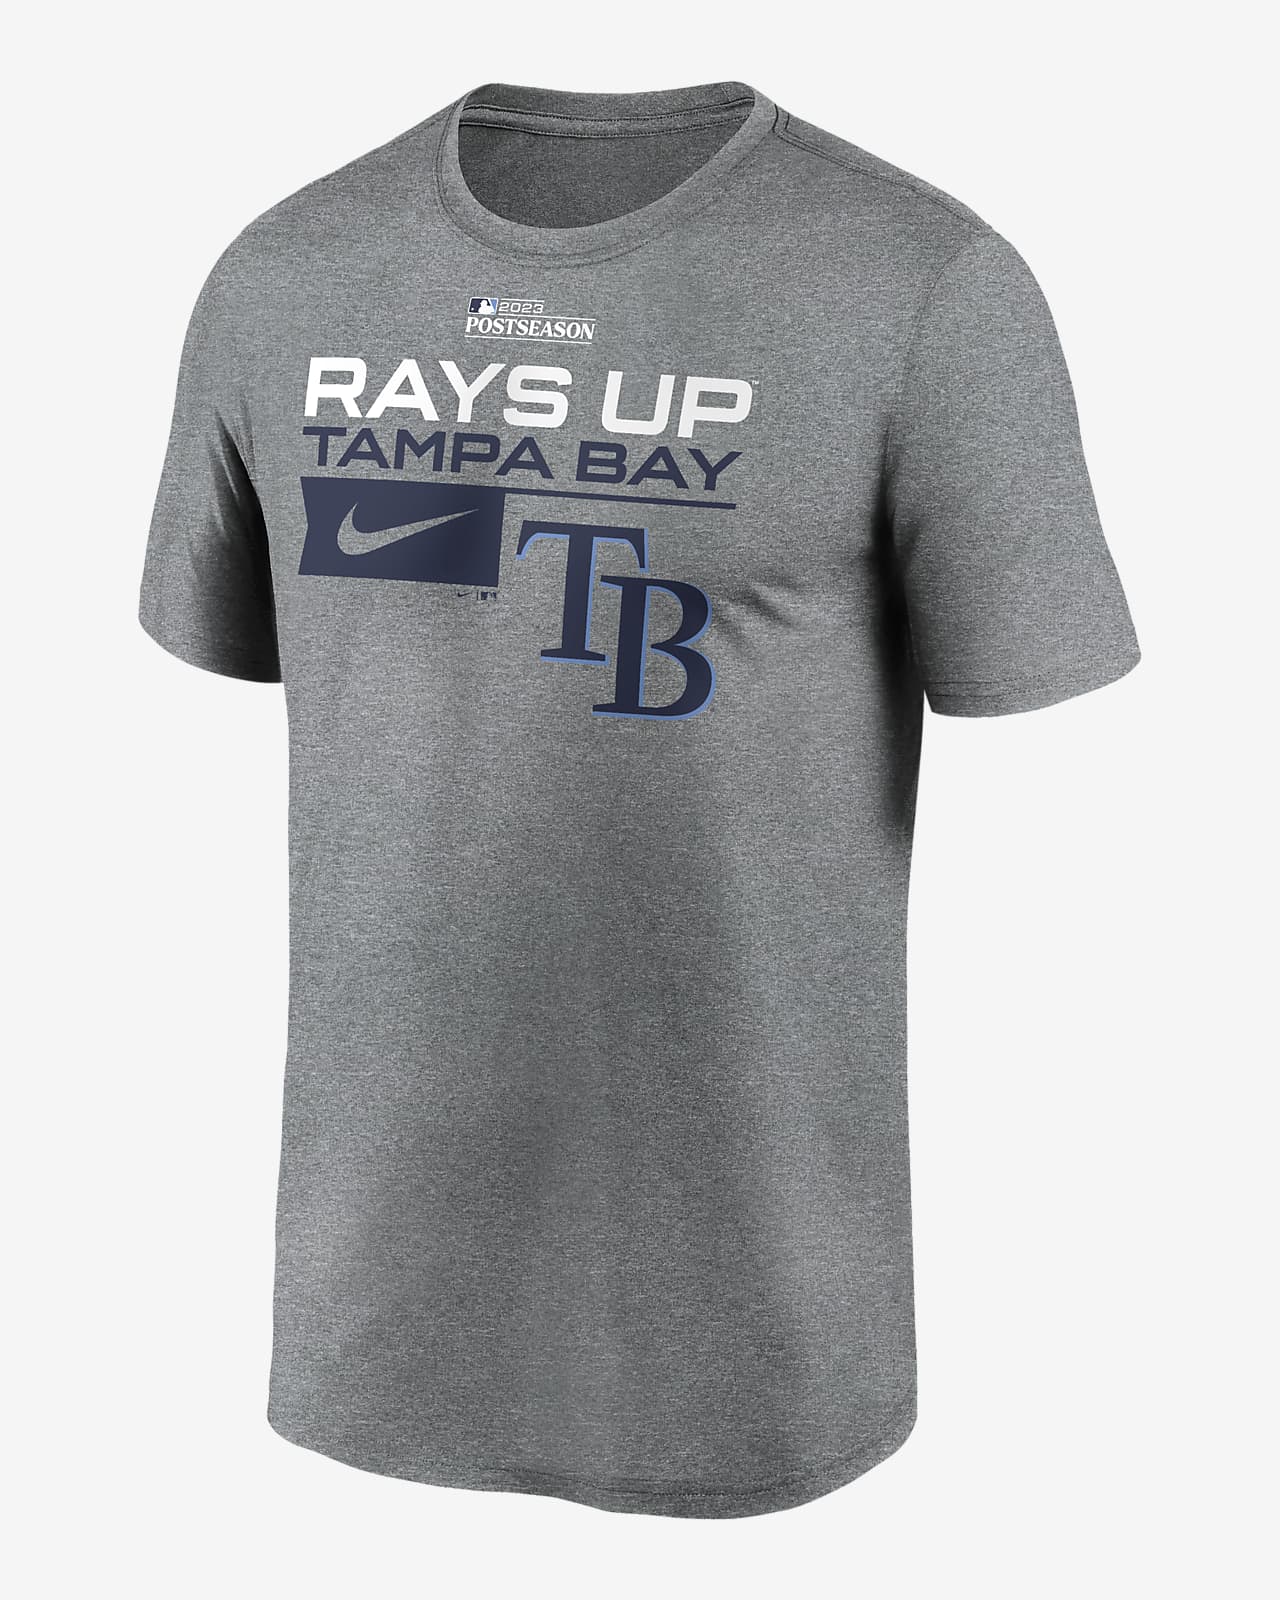 Tampa Bay Rays Tickets 2023